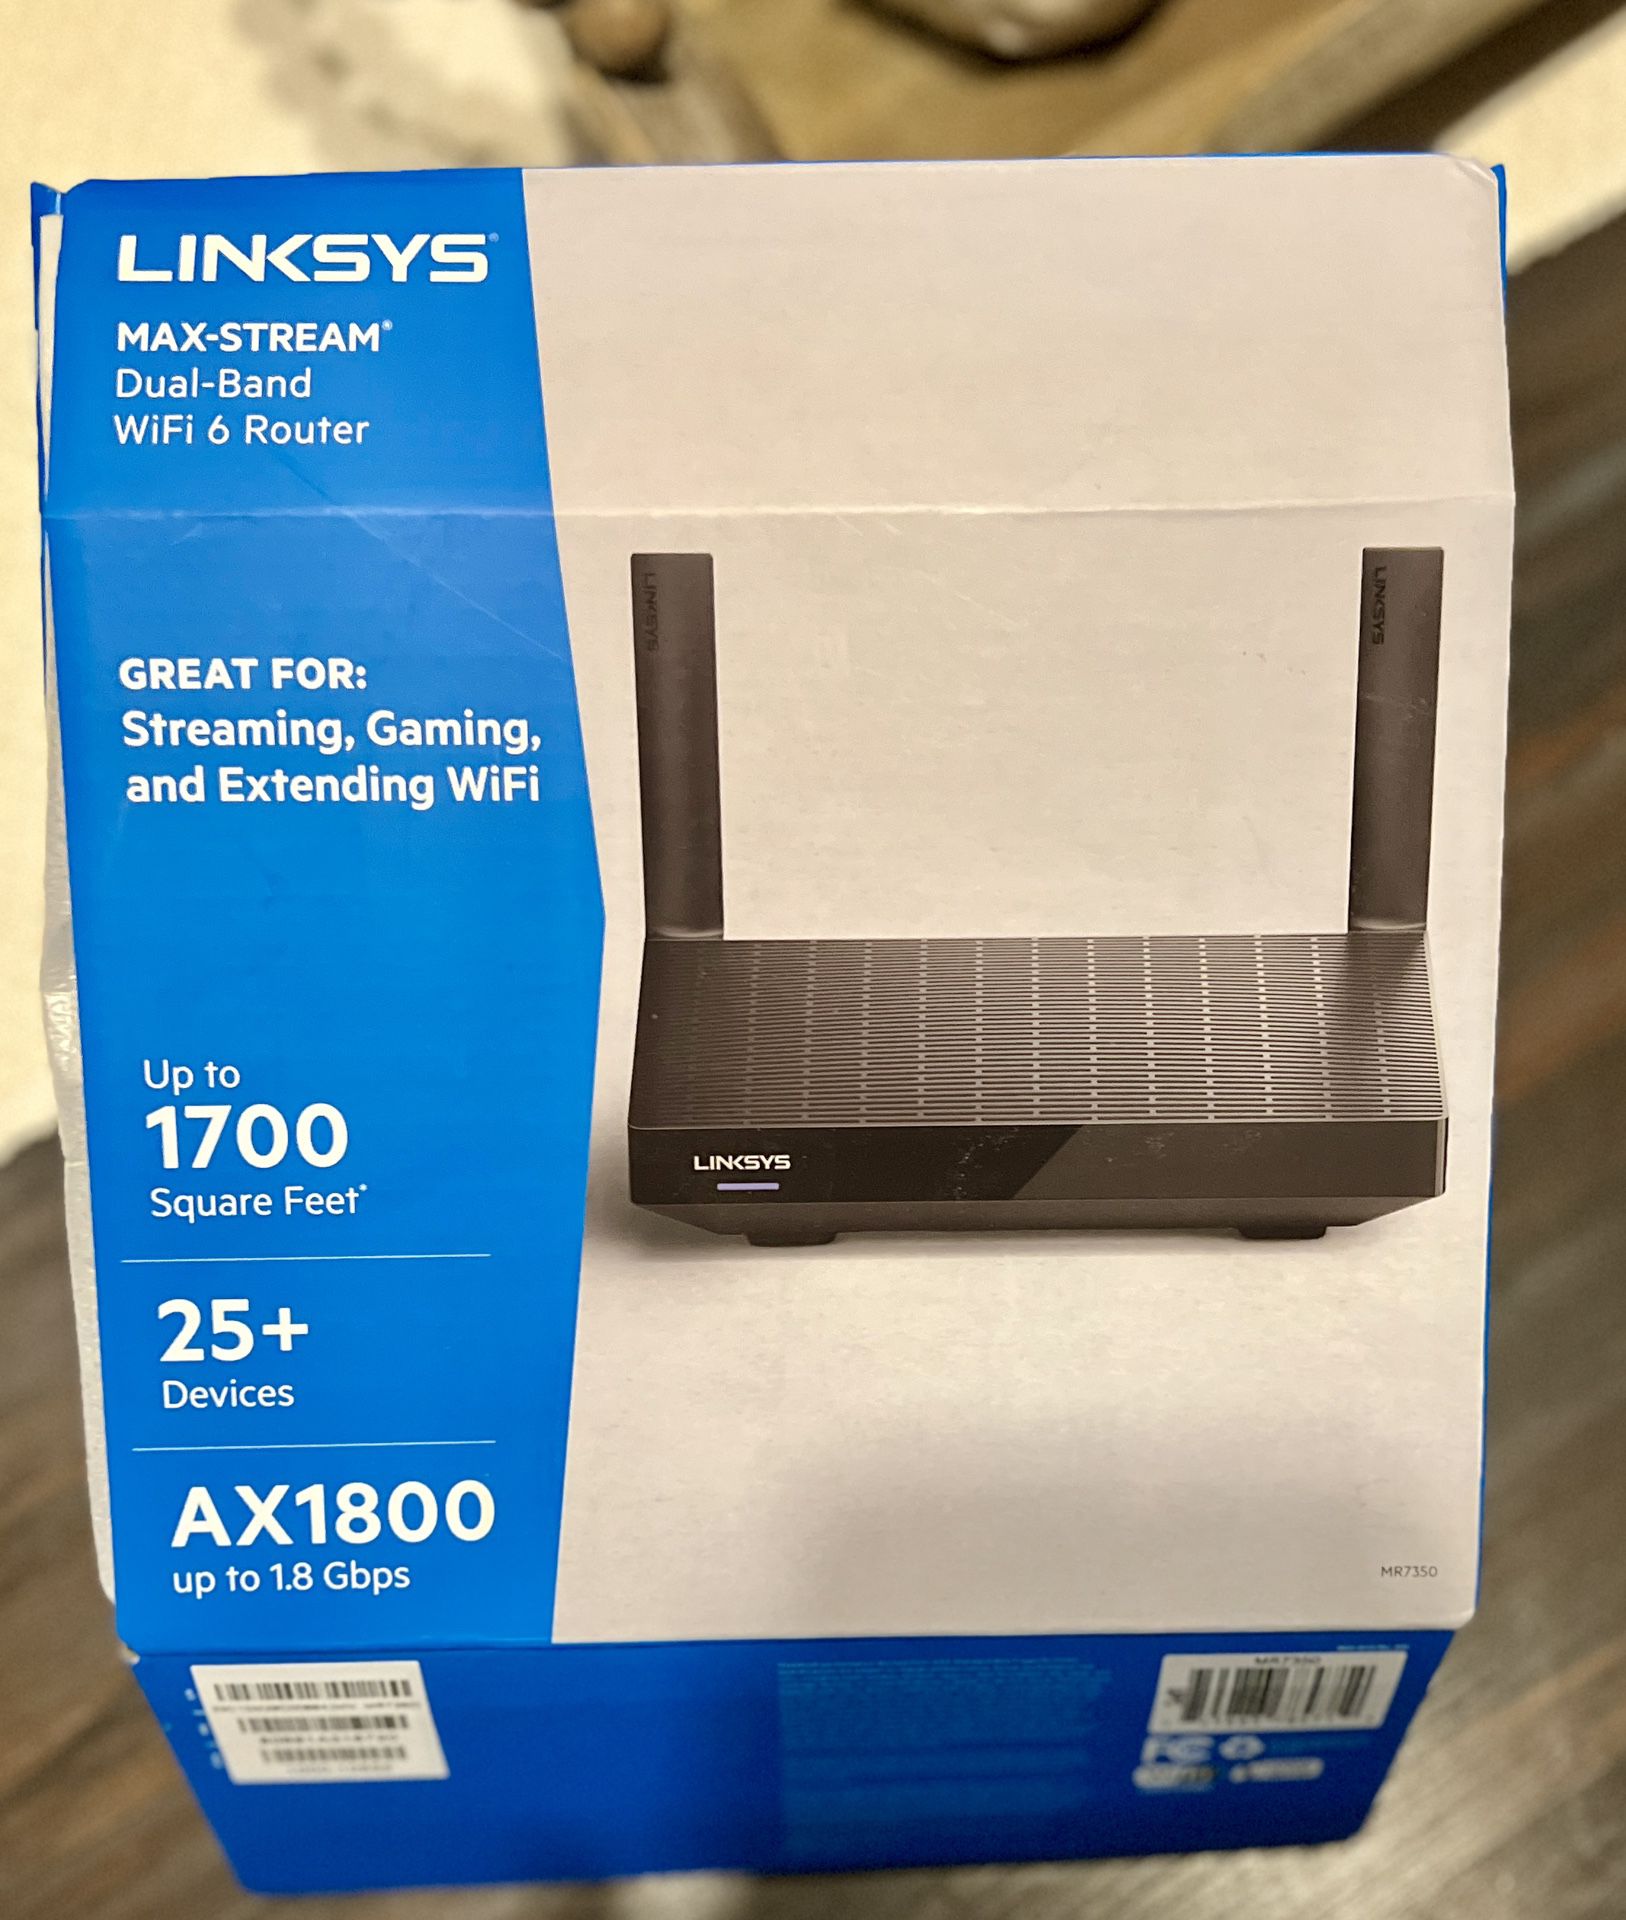 LINKSYS WI-FI 6 Router